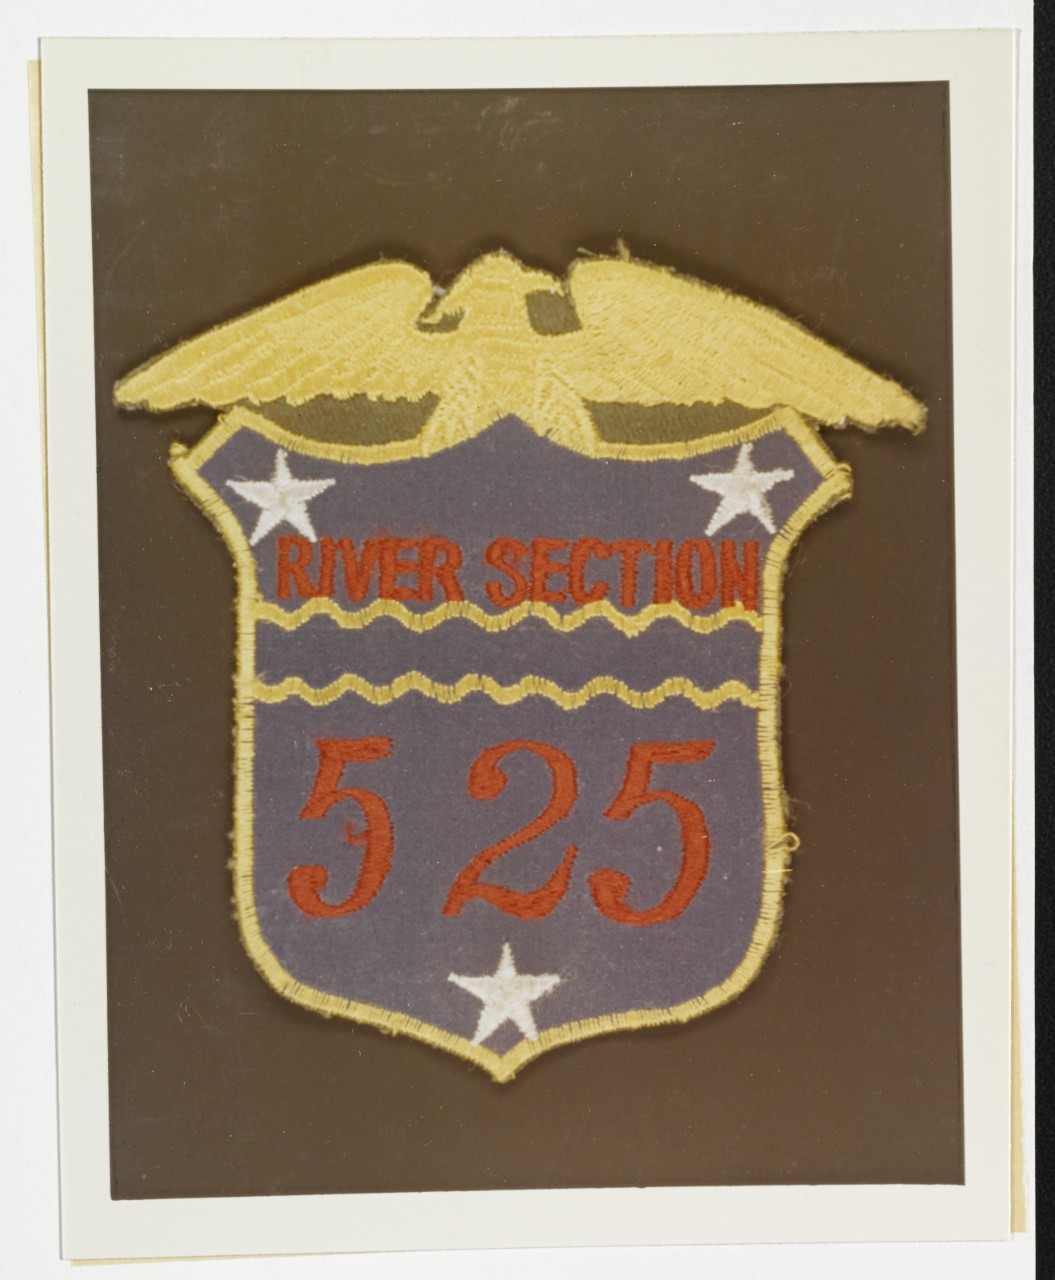 Insignia: River Section 525